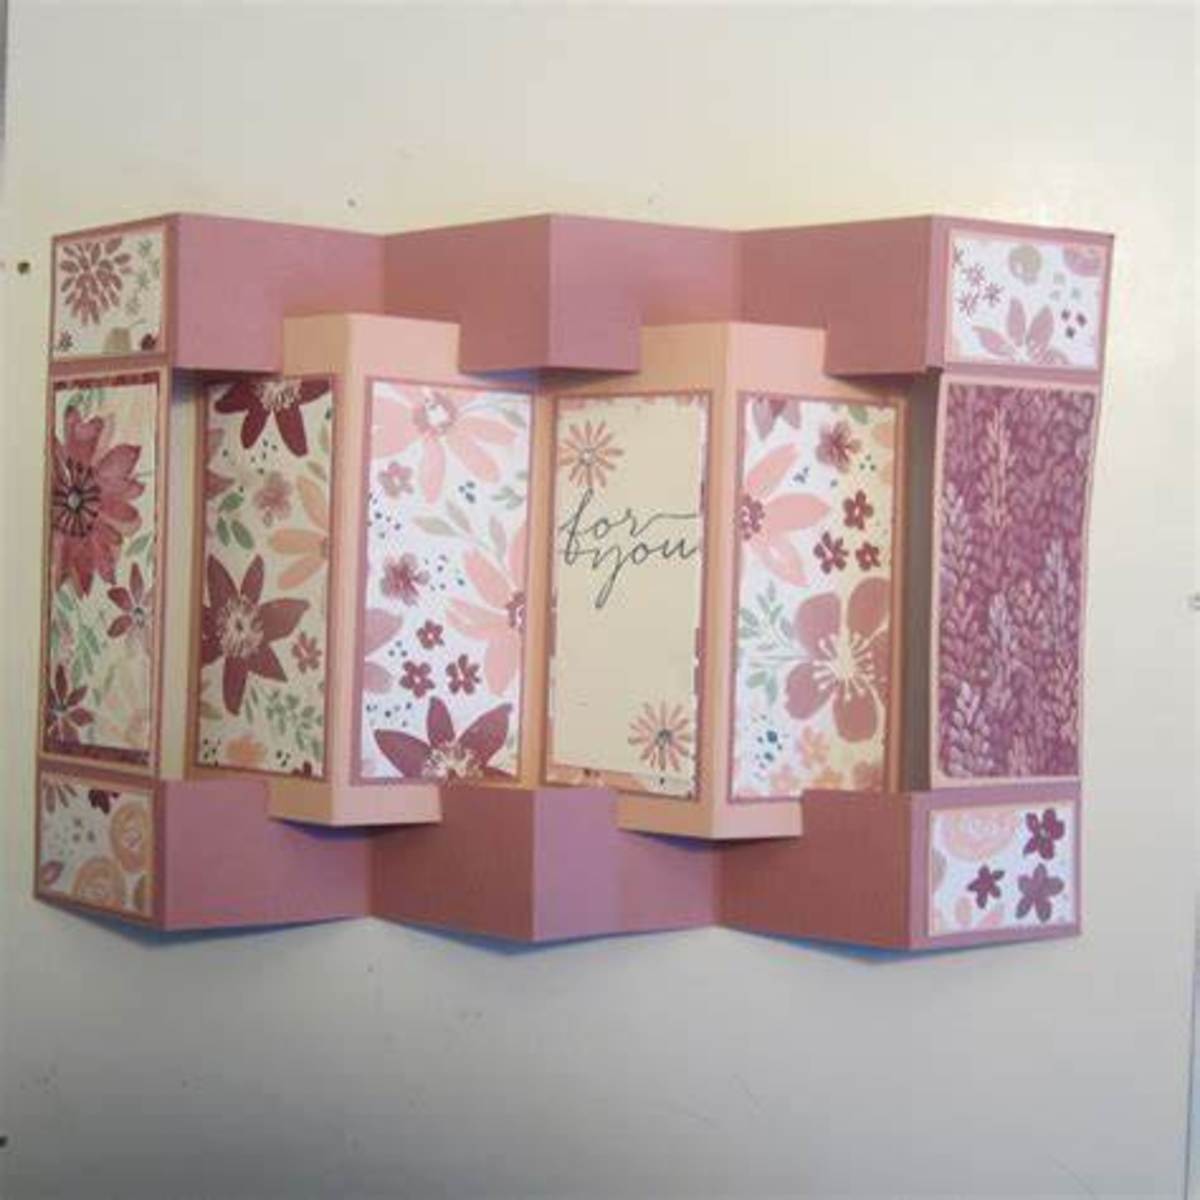 It might seem like a bit of a challenge, but concertina cards take you to a whole other creative style.